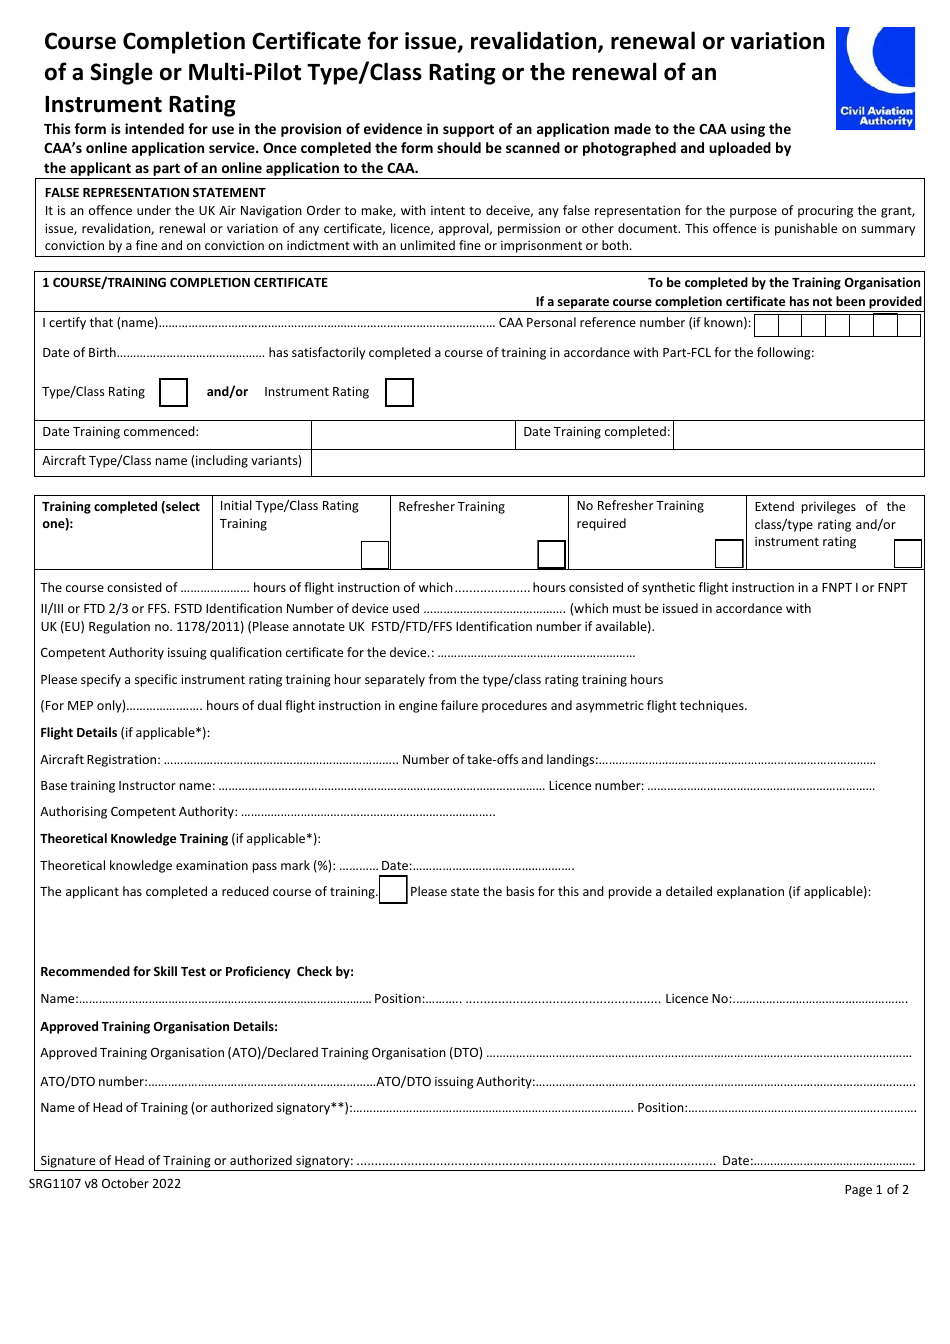 Form SRG1107 Course Completion Certificate for Issue, Revalidation, Renewal or Variation of a Single or Multi-Pilot Type / Class Rating or the Renewal of an Instrument Rating - United Kingdom, Page 1